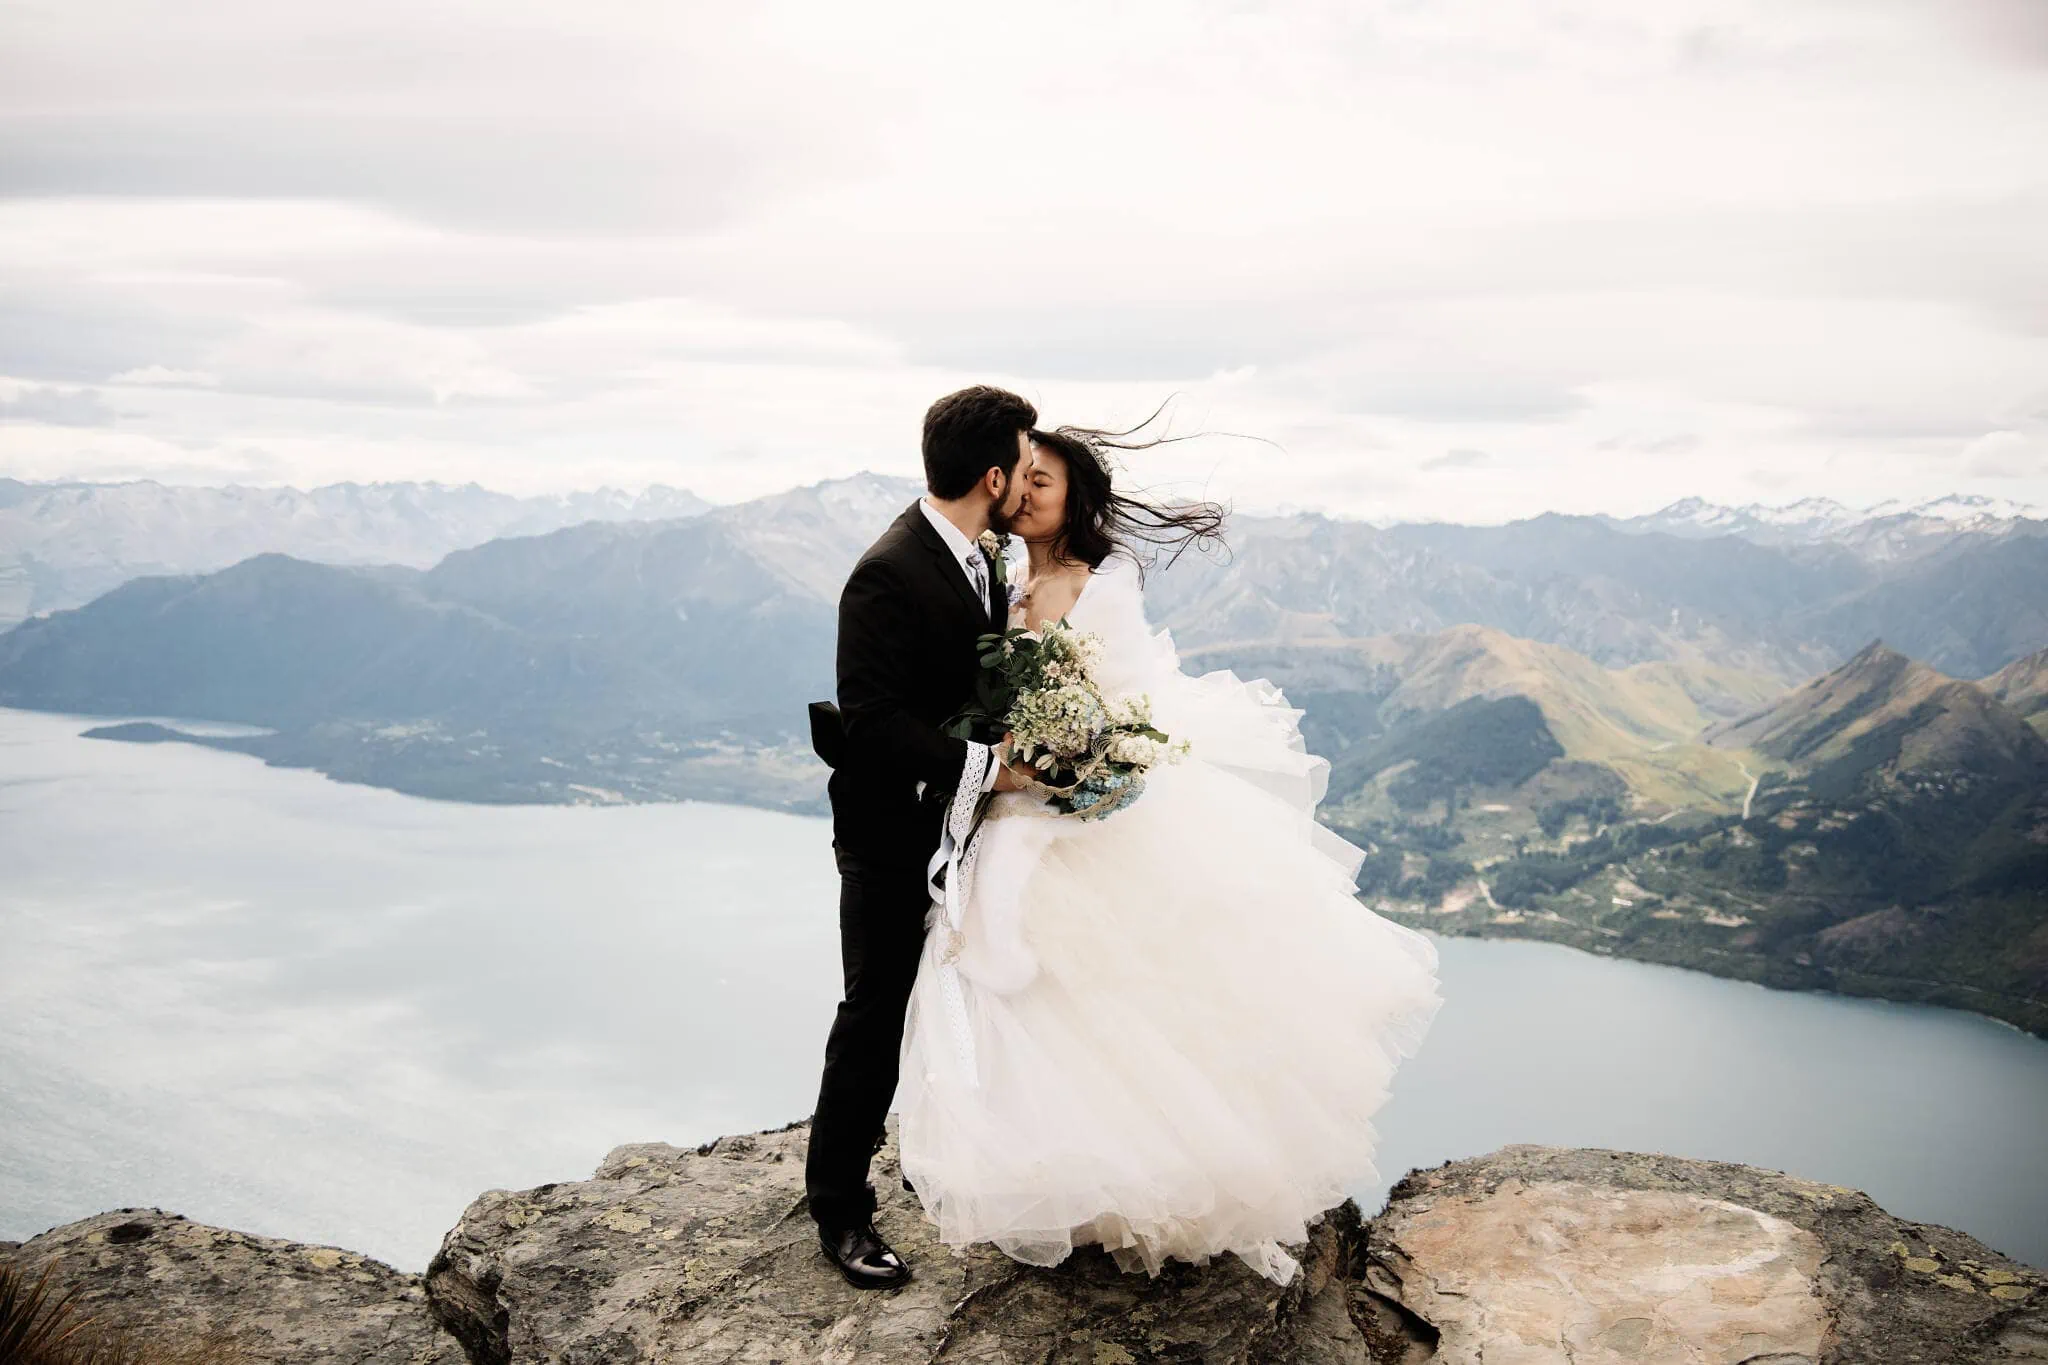 Carlos and Wanzhu share an intimate kiss on top of Cecil Peak, overlooking Lake Wanaka during their heli elopement wedding.